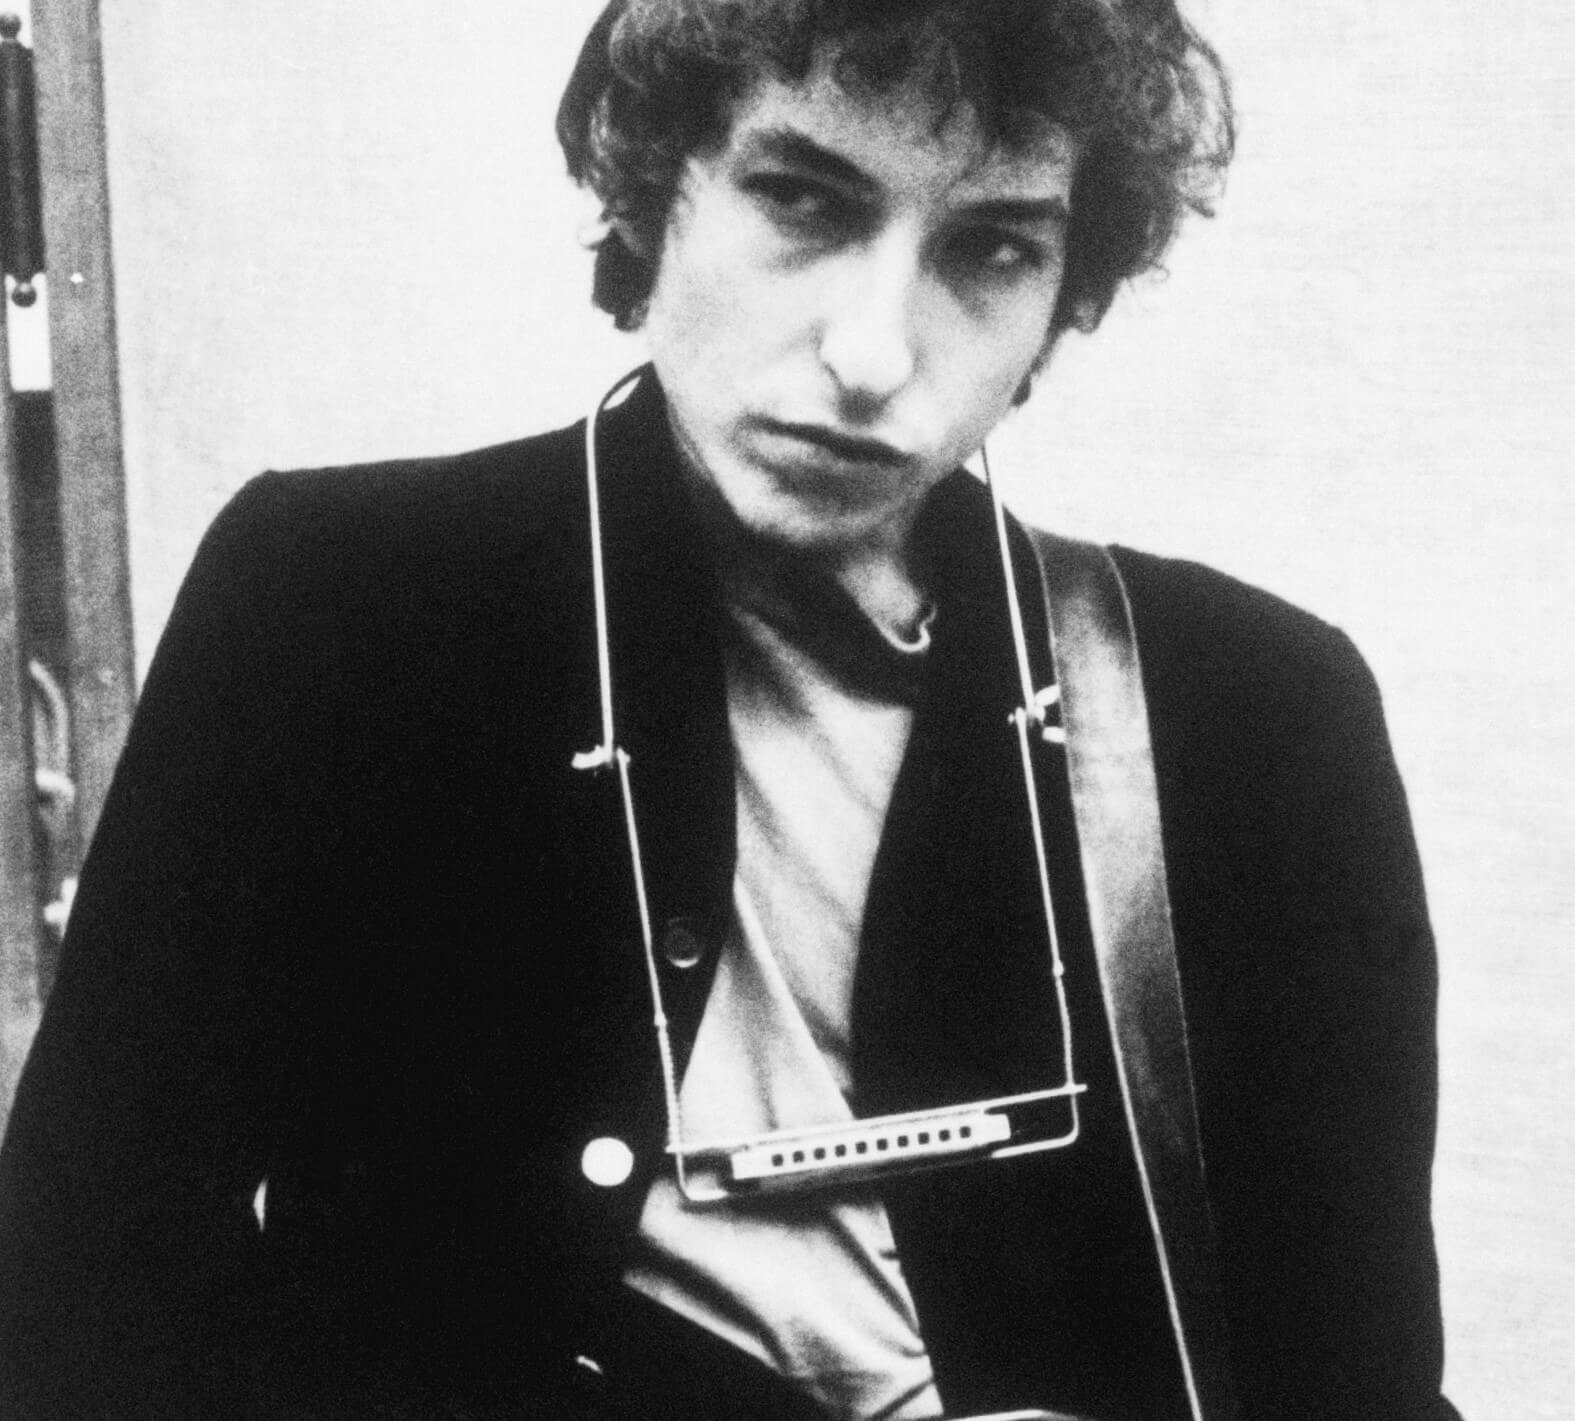 Bob Dylan in black-and-white